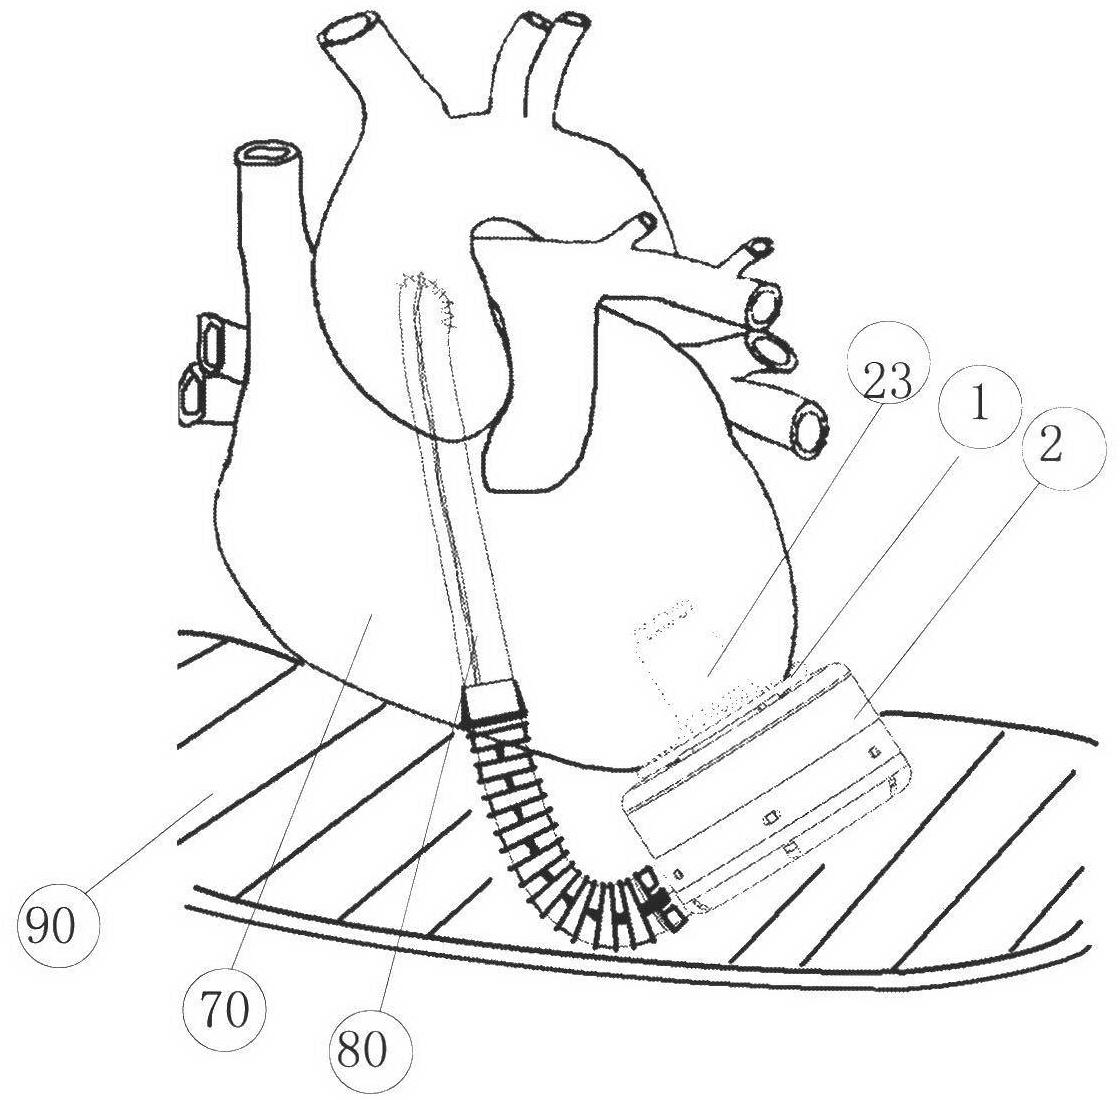 A mechanical device that assists the blood circulation of the heart